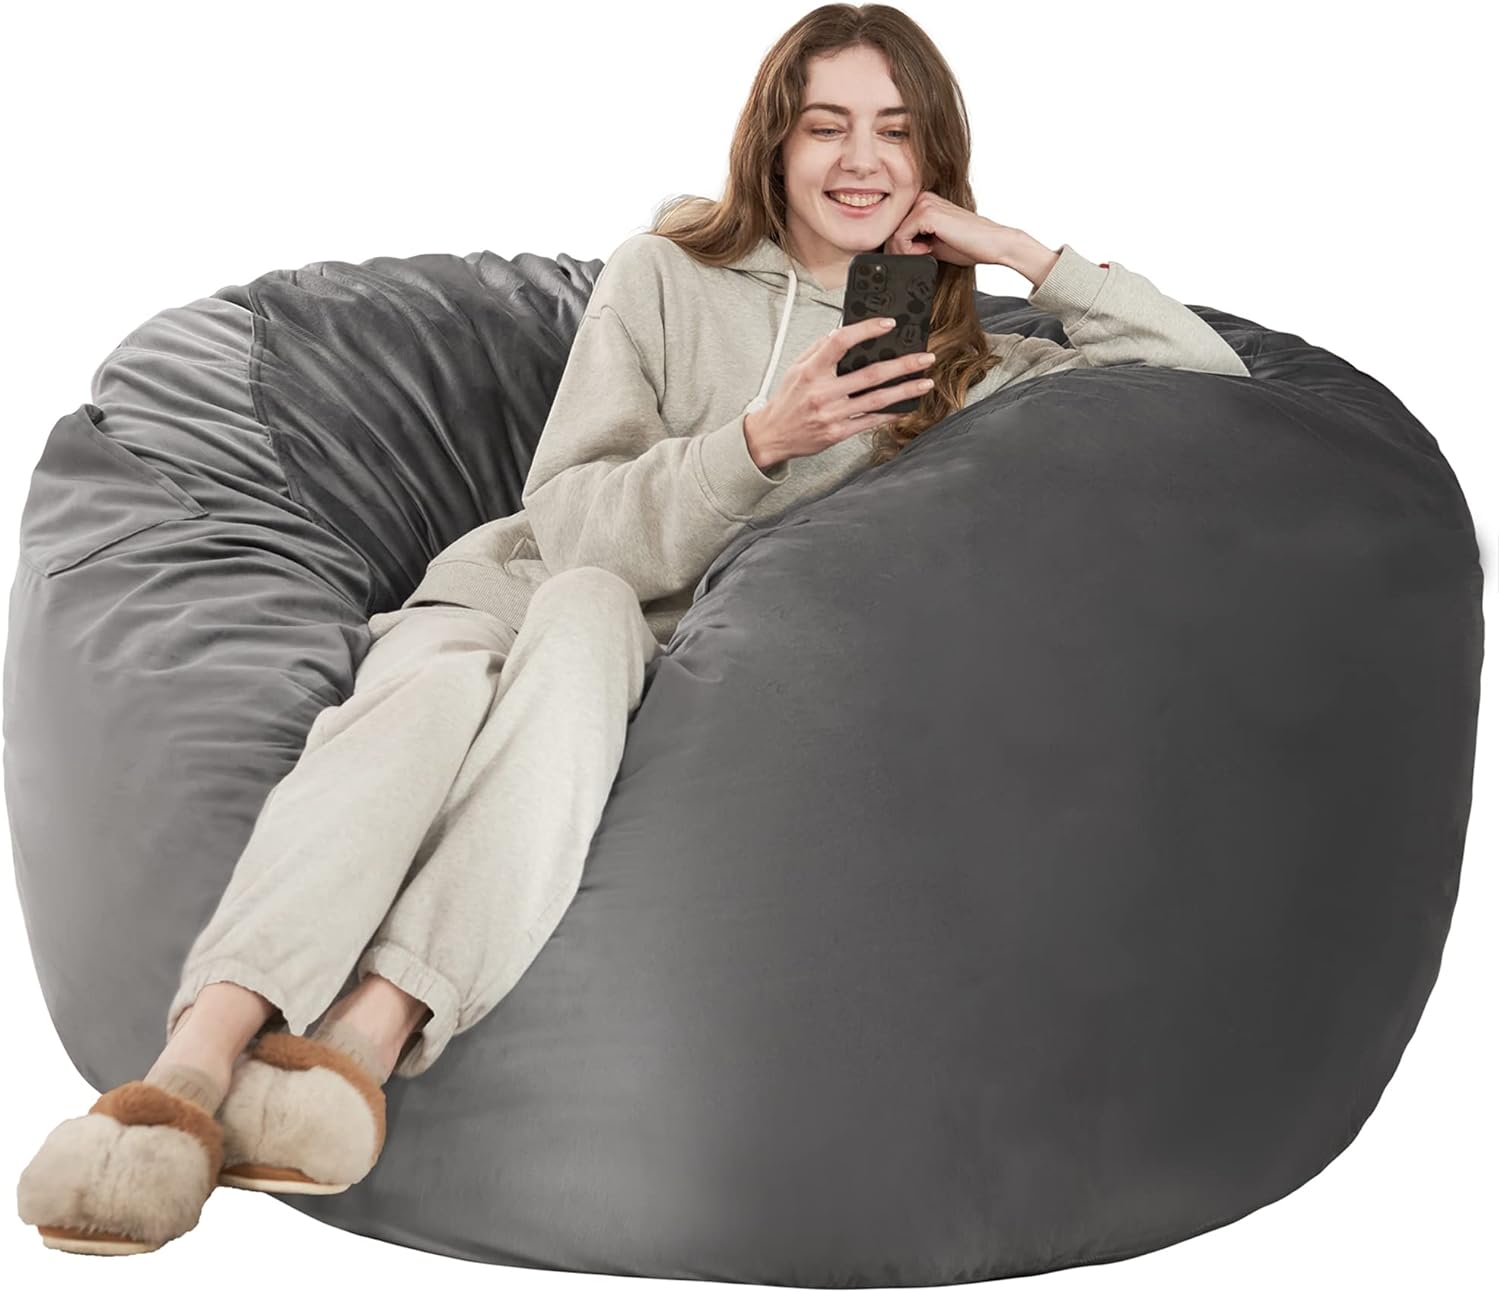 HABUTWAY Bean Bag Chair: Giant 4' Memory Foam Furniture Bean Bag Chairs for Adults with Microfiber Cover - 4Ft, Grey